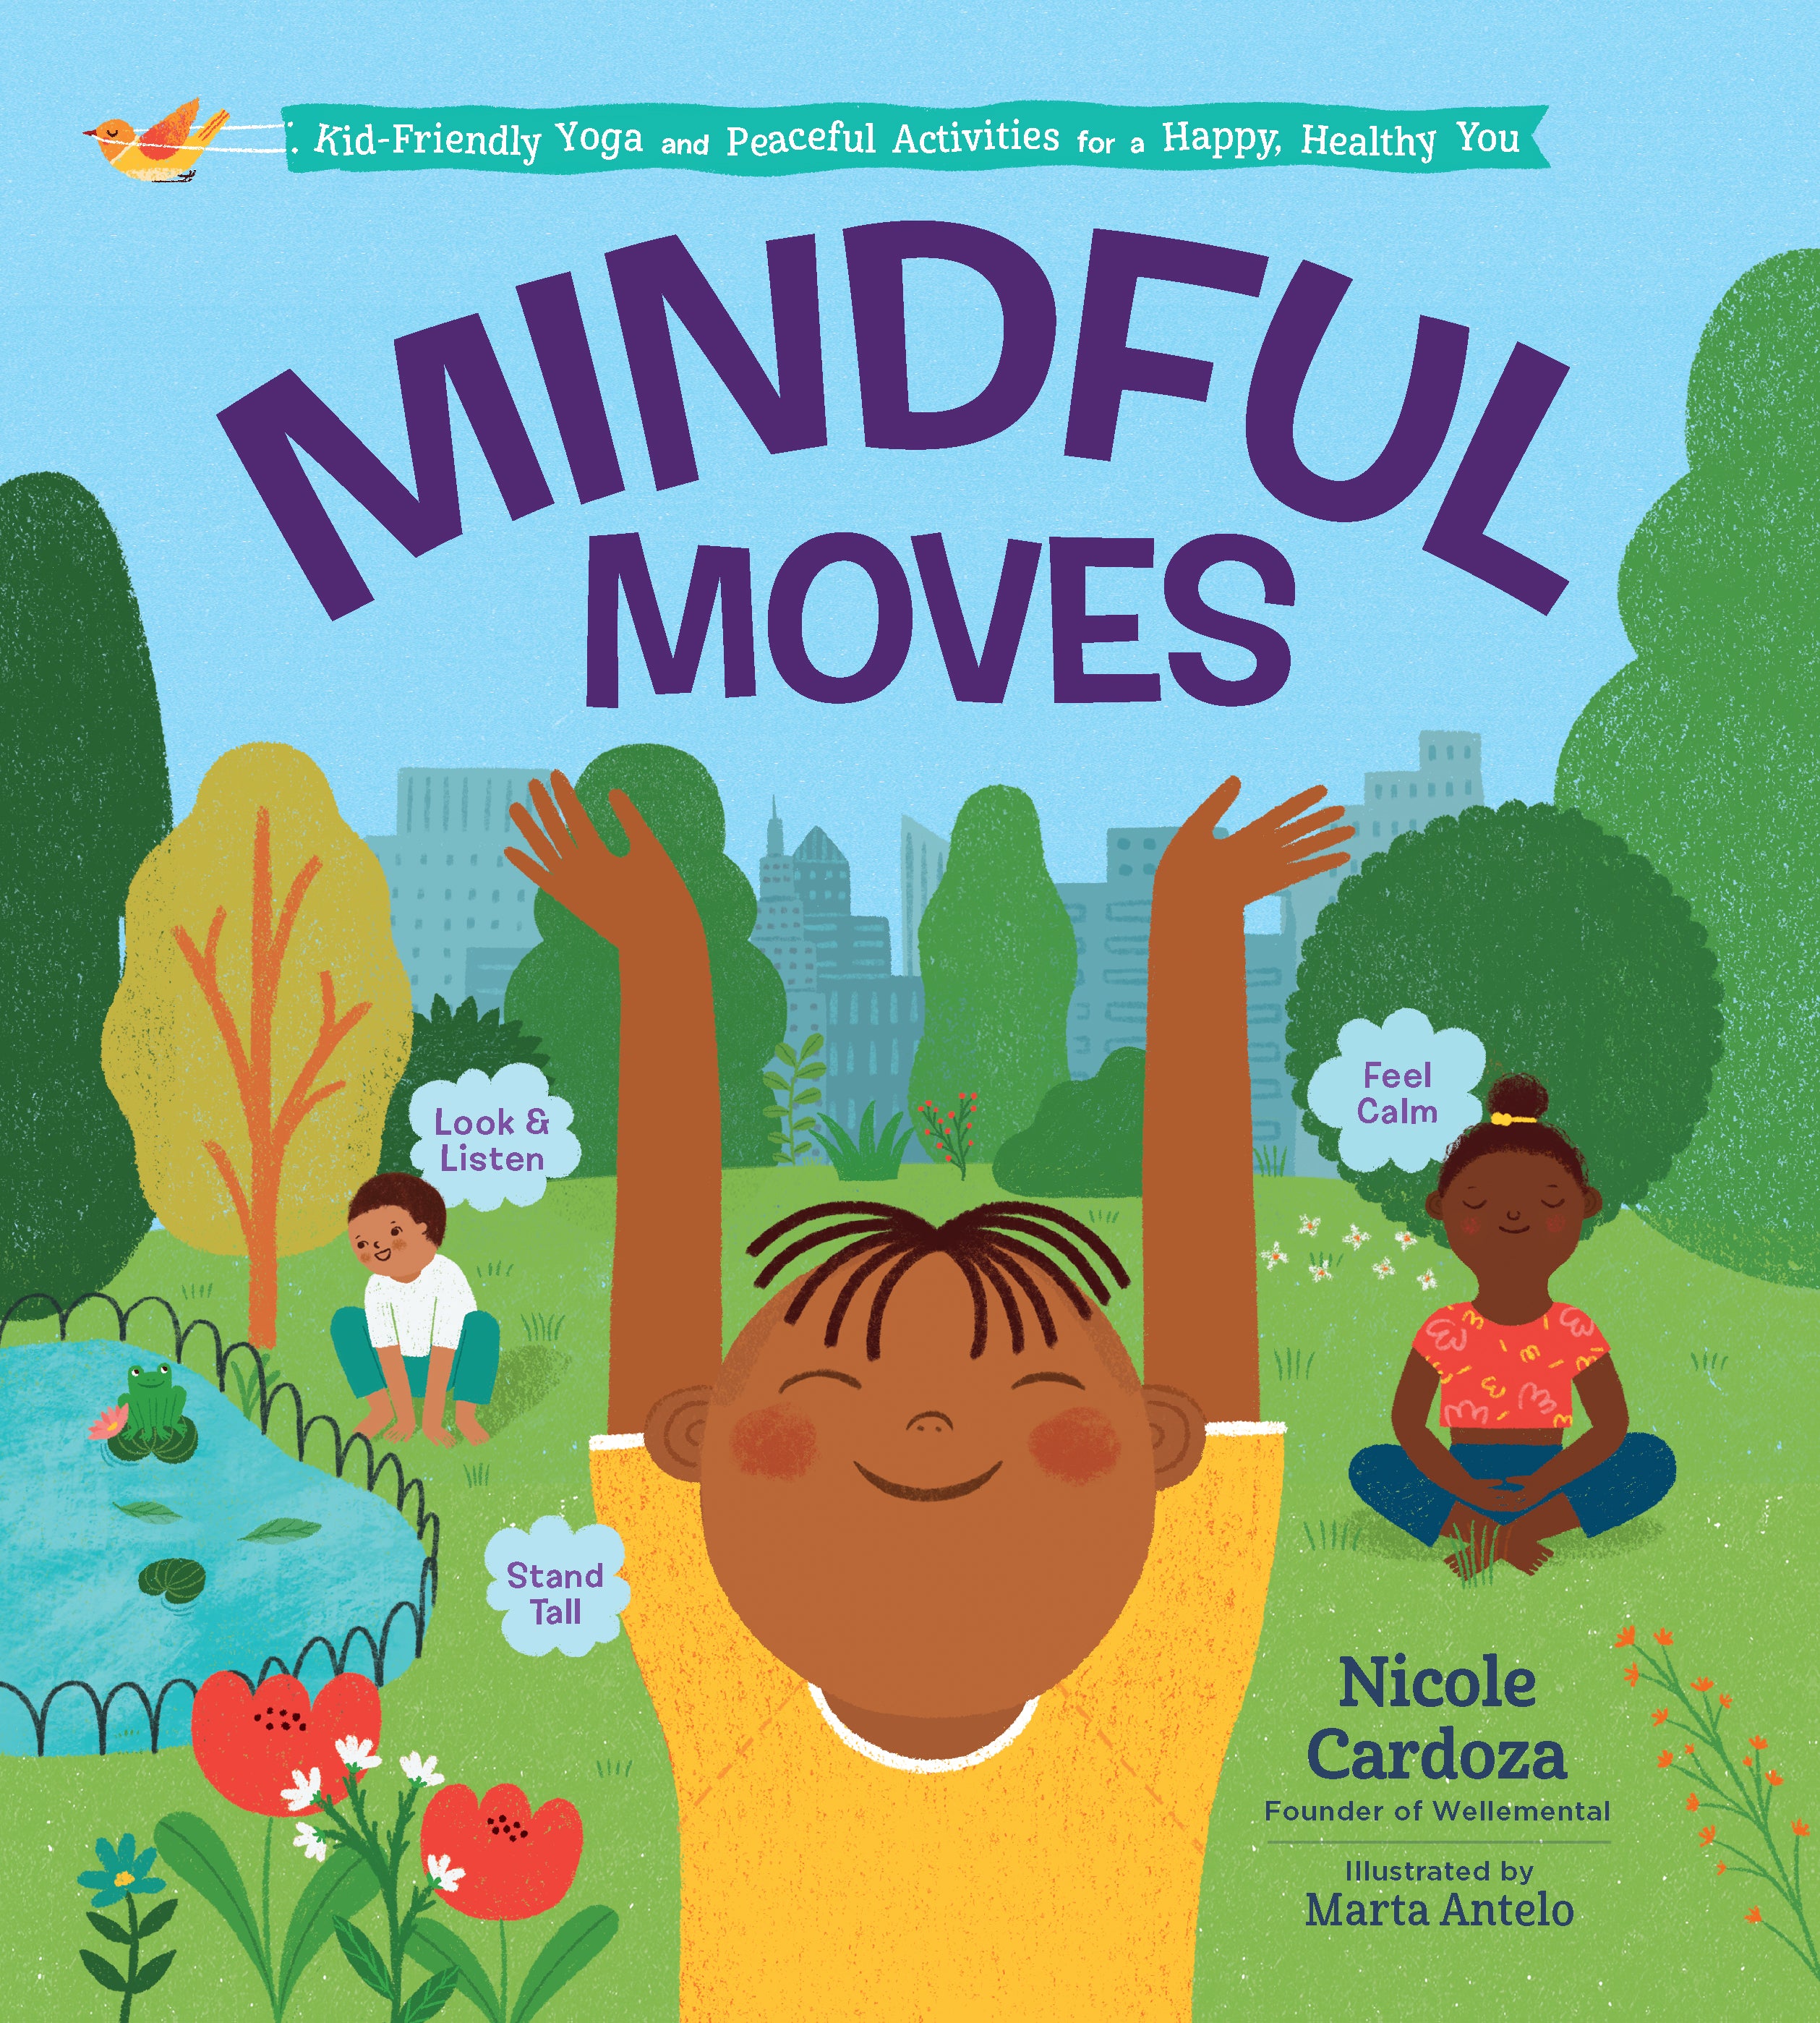 Mindful Moves - Kid Friendly Yoga and Peaceful Activities for a Happy, Healthy You    